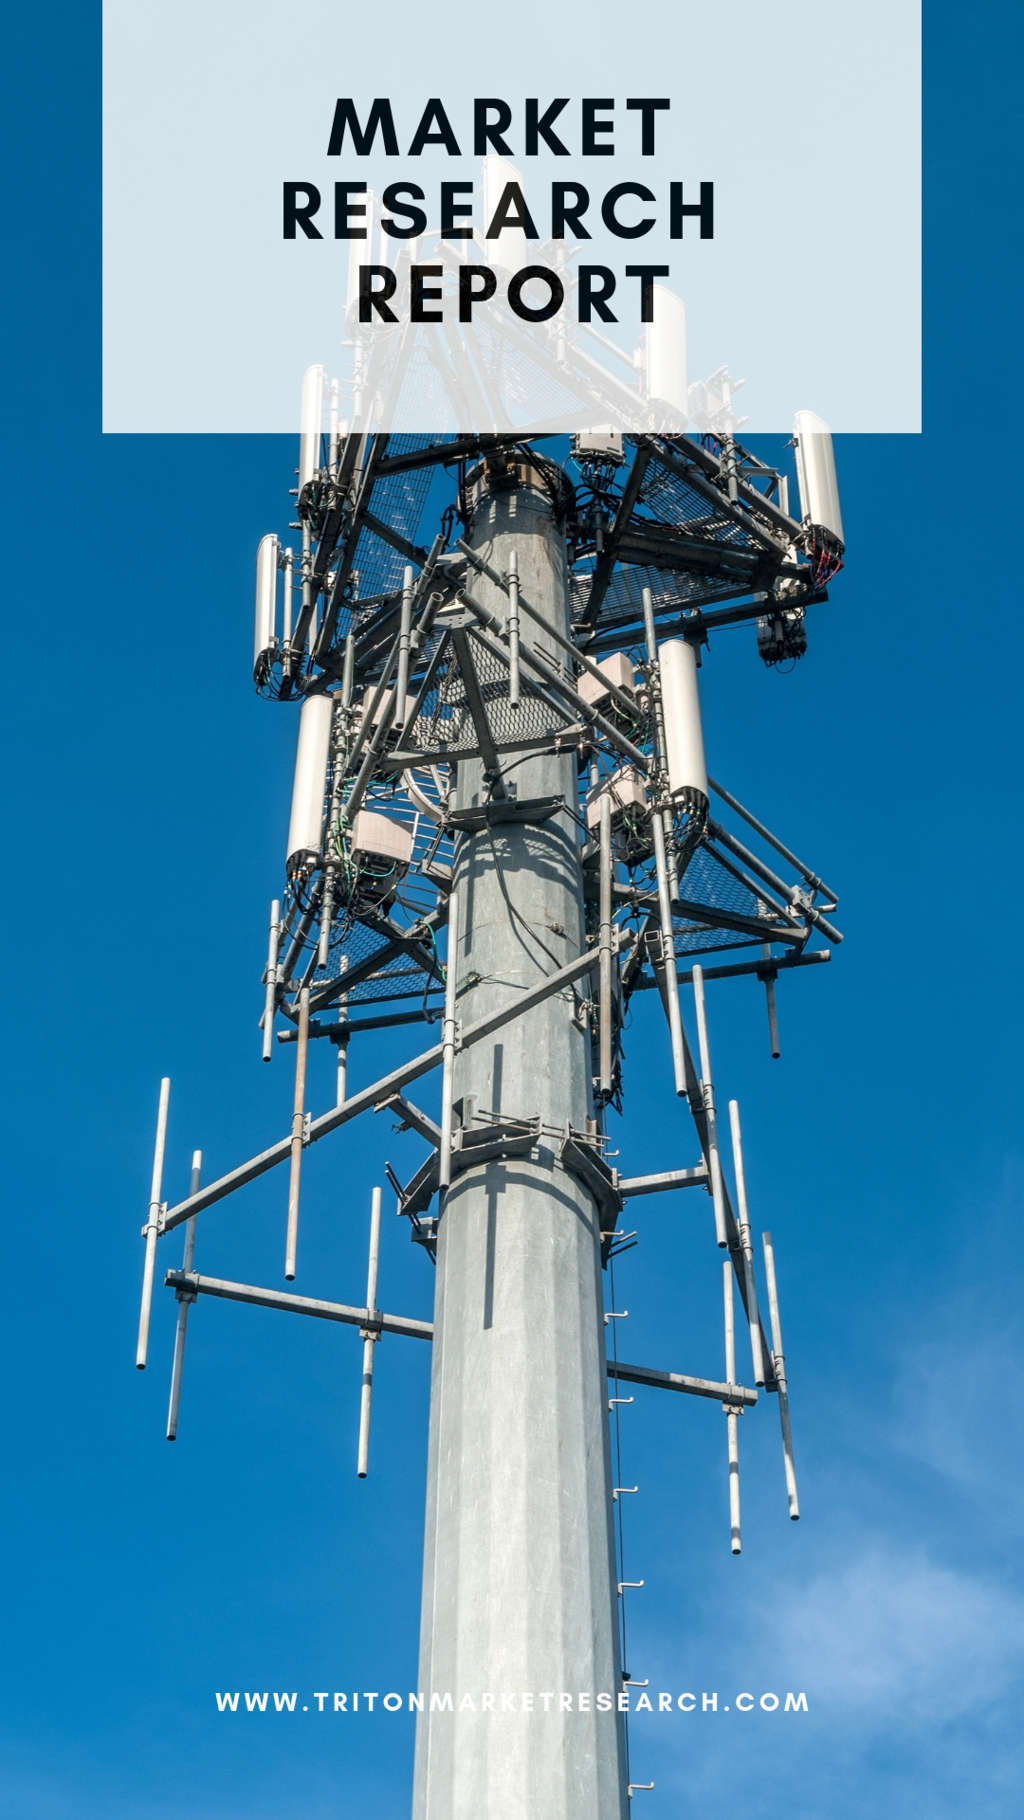 MIDDLE EAST AND AFRICA 5G INFRASTRUCTURE MARKET 2019-2025